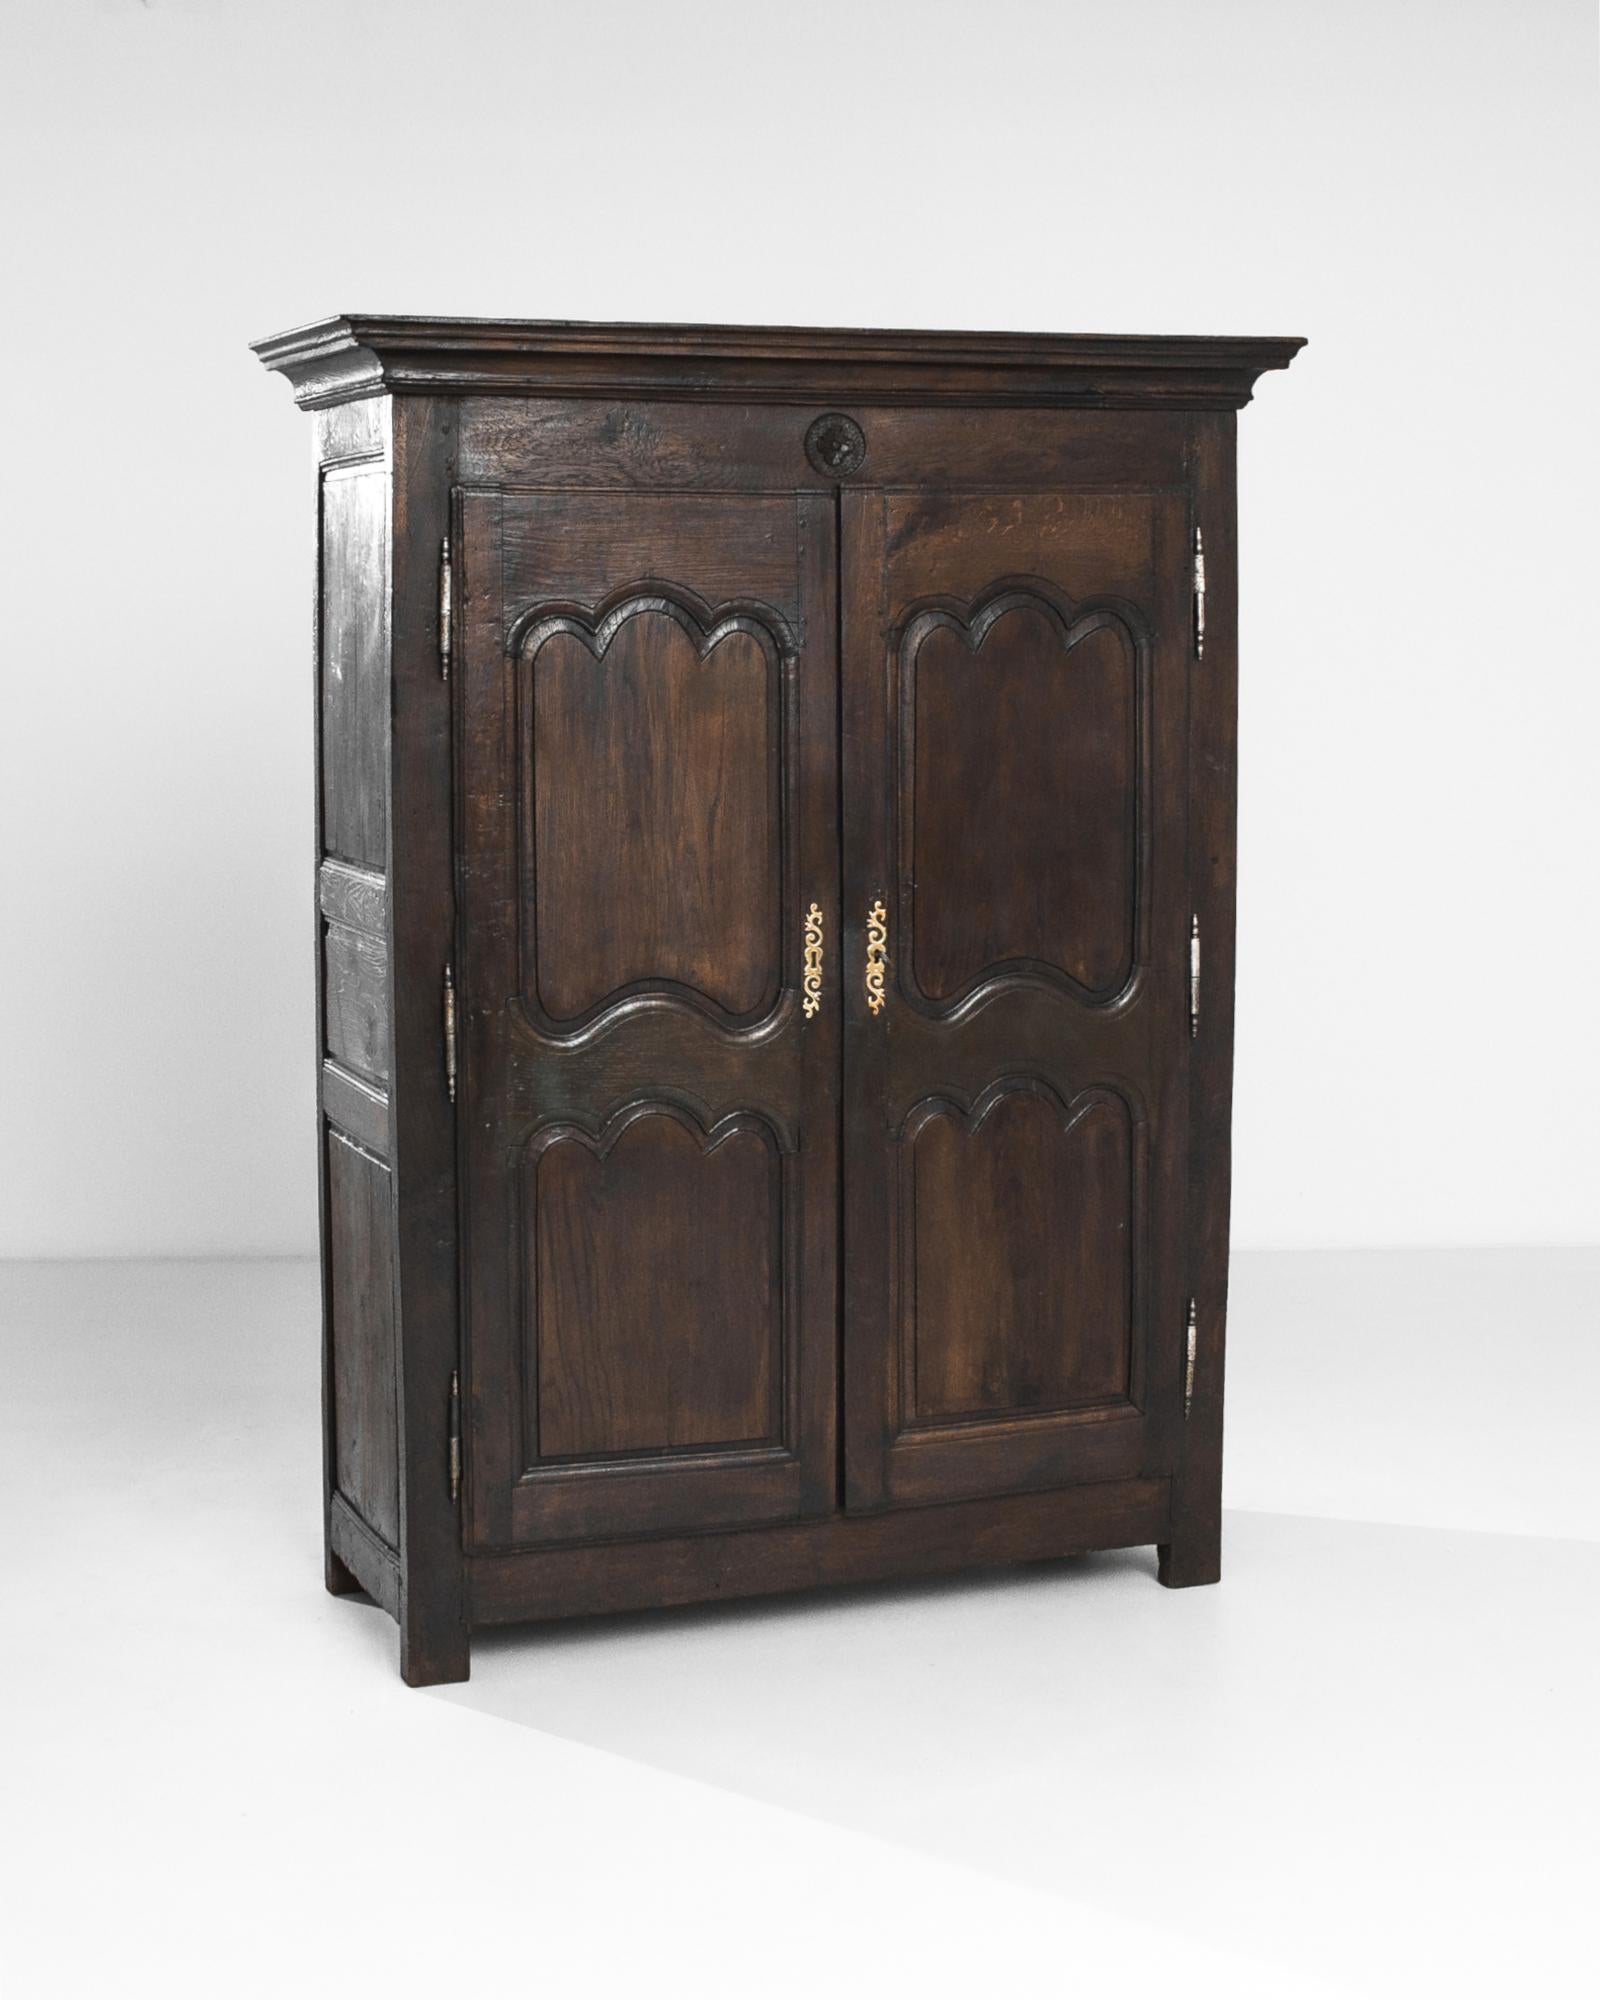 A wooden cabinet from France, circa 1800. Scalloped panels gift the cabinet a graceful symmetry, while the deep sable color of the wood, accentuated by a rich polish, lends a somber, enigmatic inflection. Broad double doors open onto a trio of